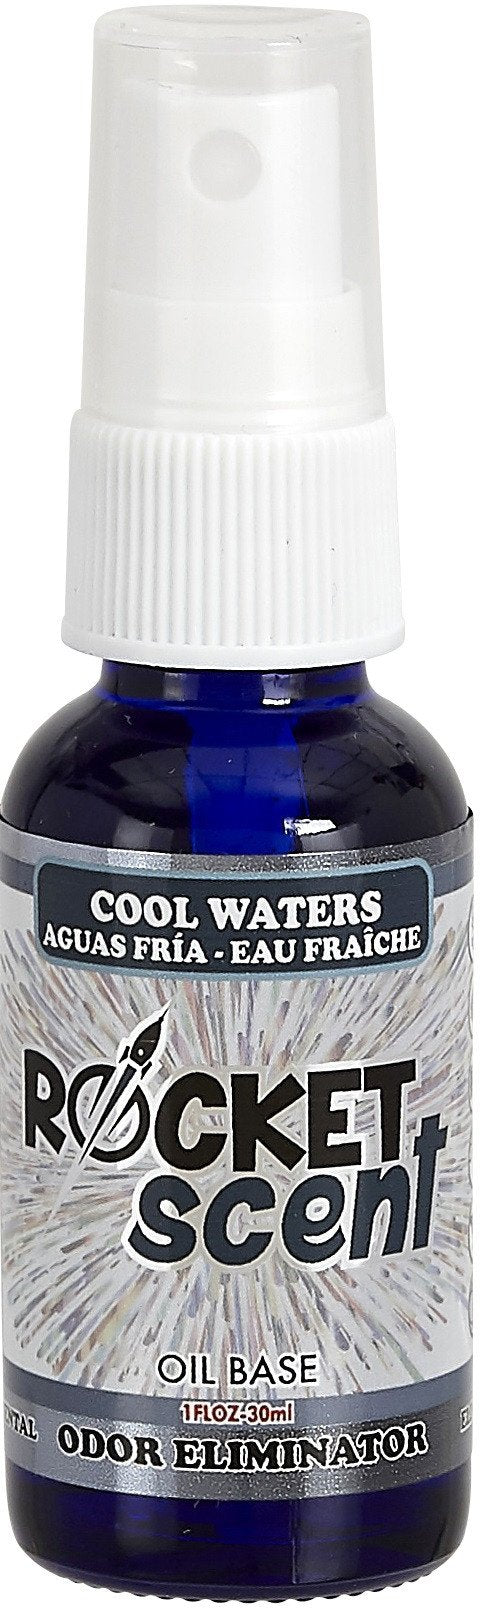 Rocket Scent Concentrated Air Fresheners Cool Water